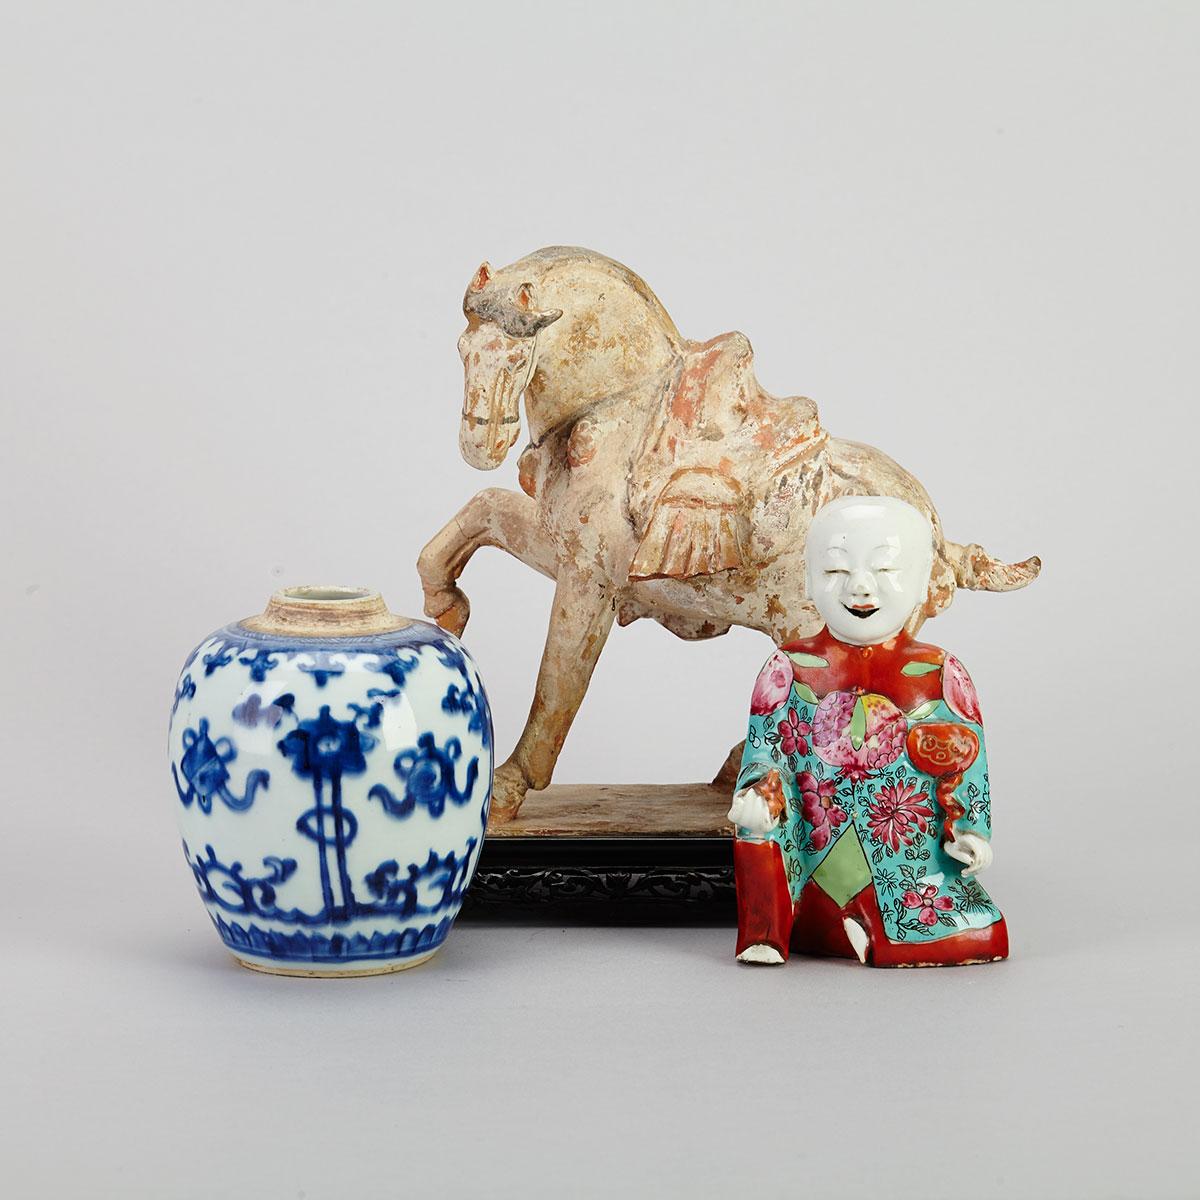 Two Chinese Porcelain Items, 18th/19th Century